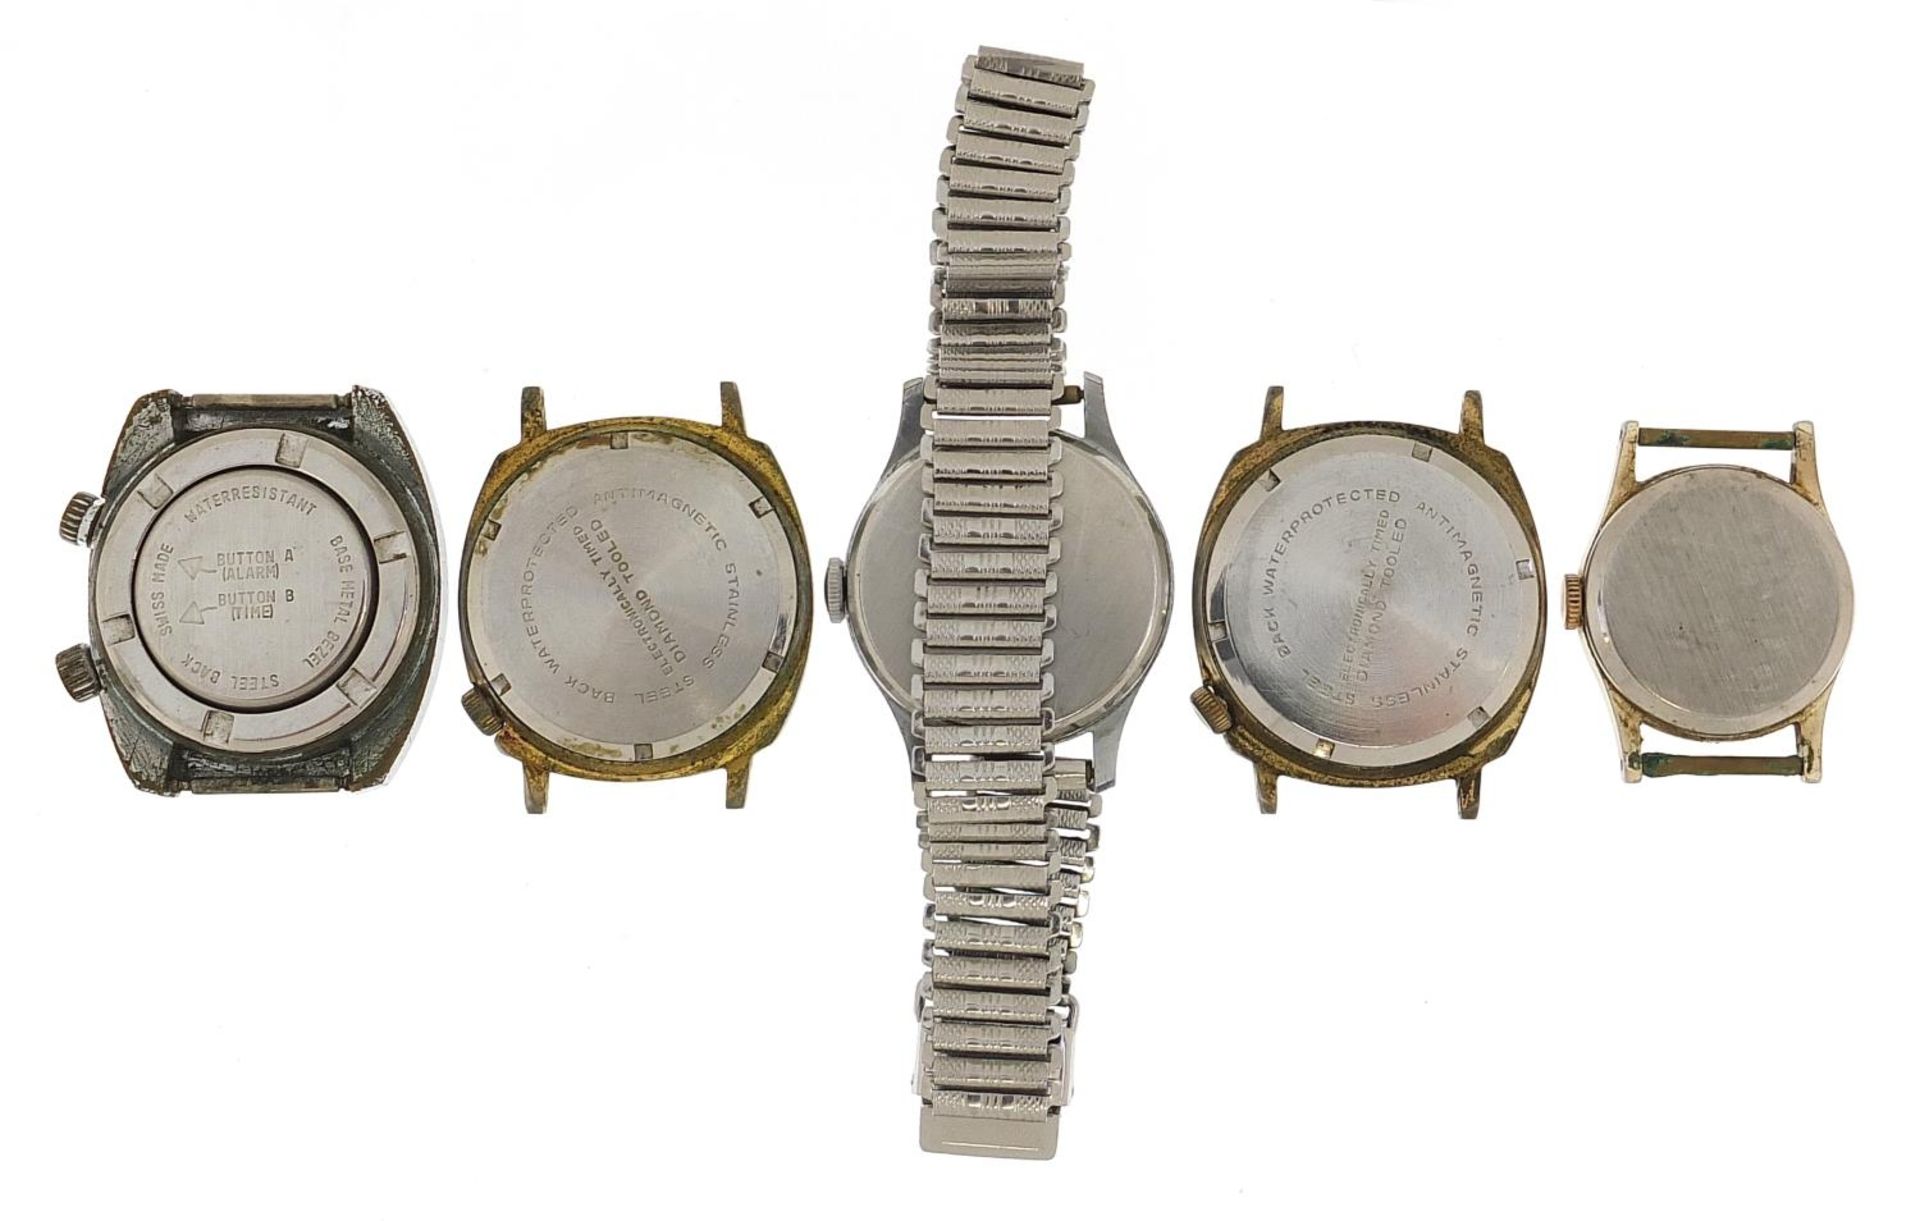 Five vintage wristwatches including Ingersoll Triumph, Memostar alarm, Lectro and Ingersoll - Image 5 of 5